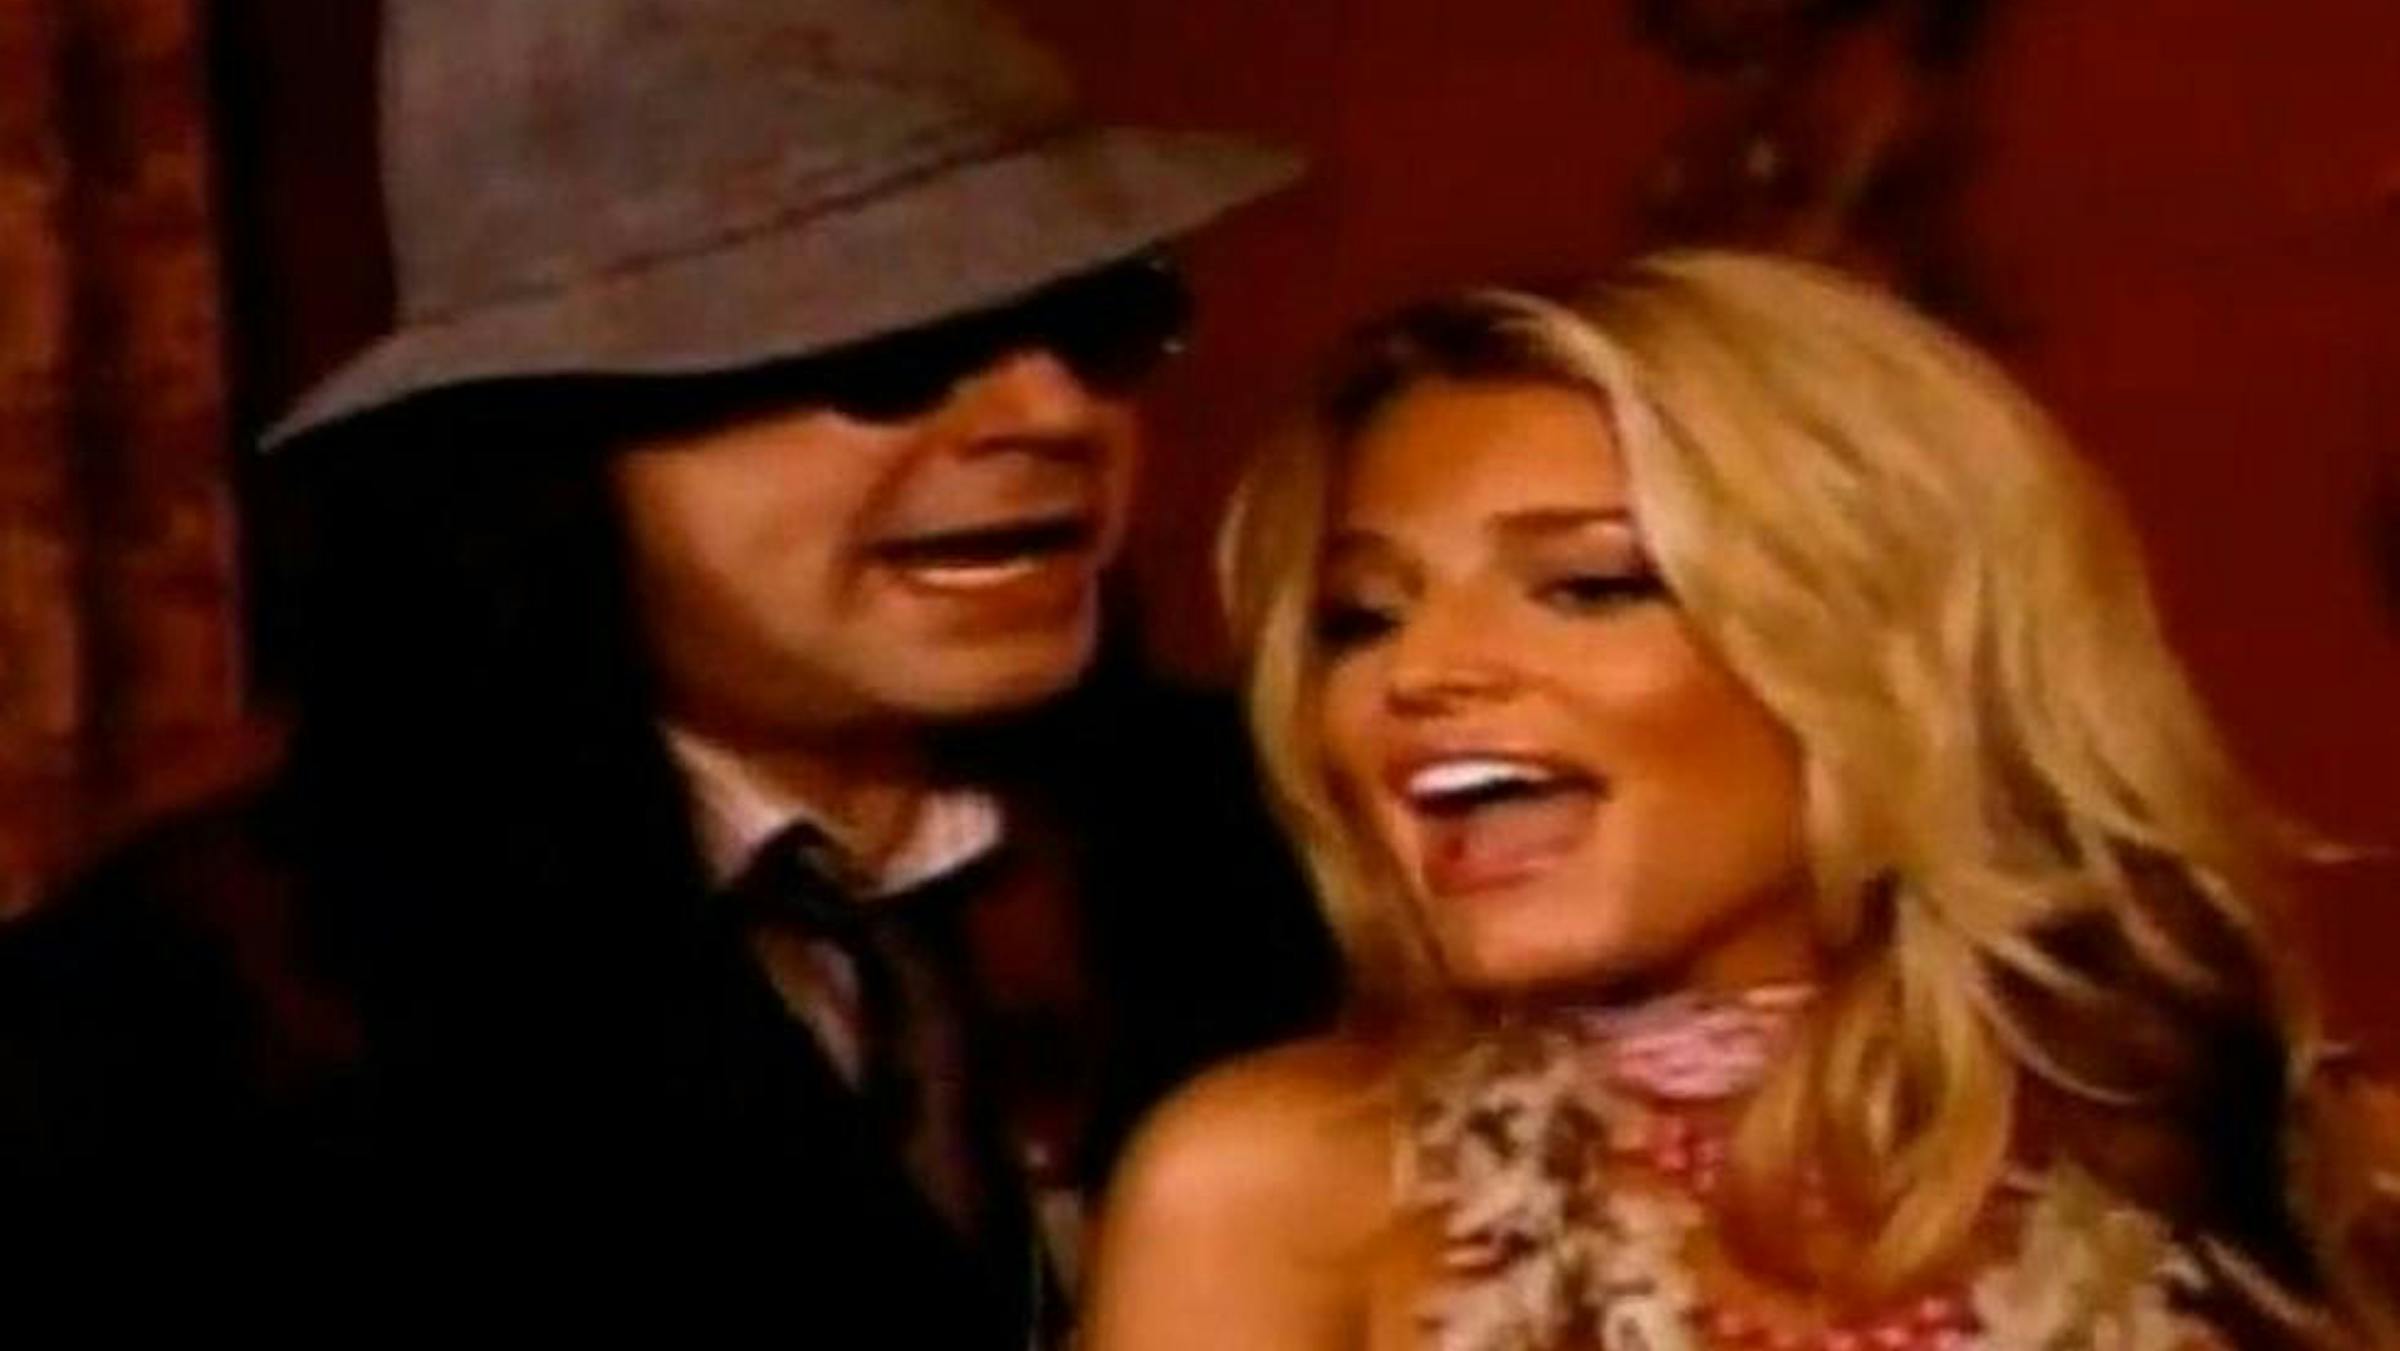 A Deep Dive Into The Video For Ozzy Osbourne And Jessica Simpson's Winter Wonderland